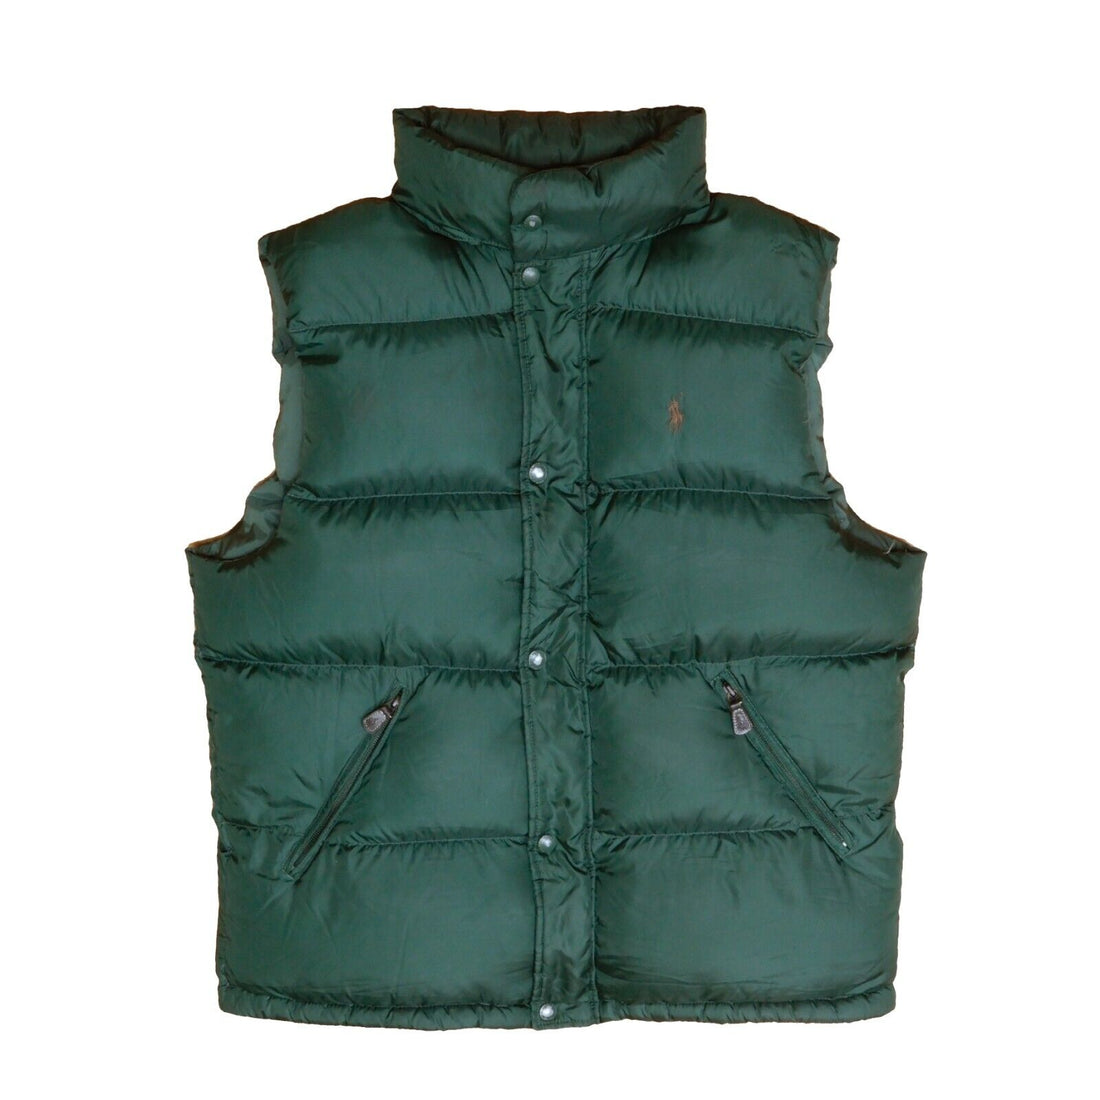 Vintage Polo Ralph Lauren Puffer Vest Size Large Green 90s Down Insulated